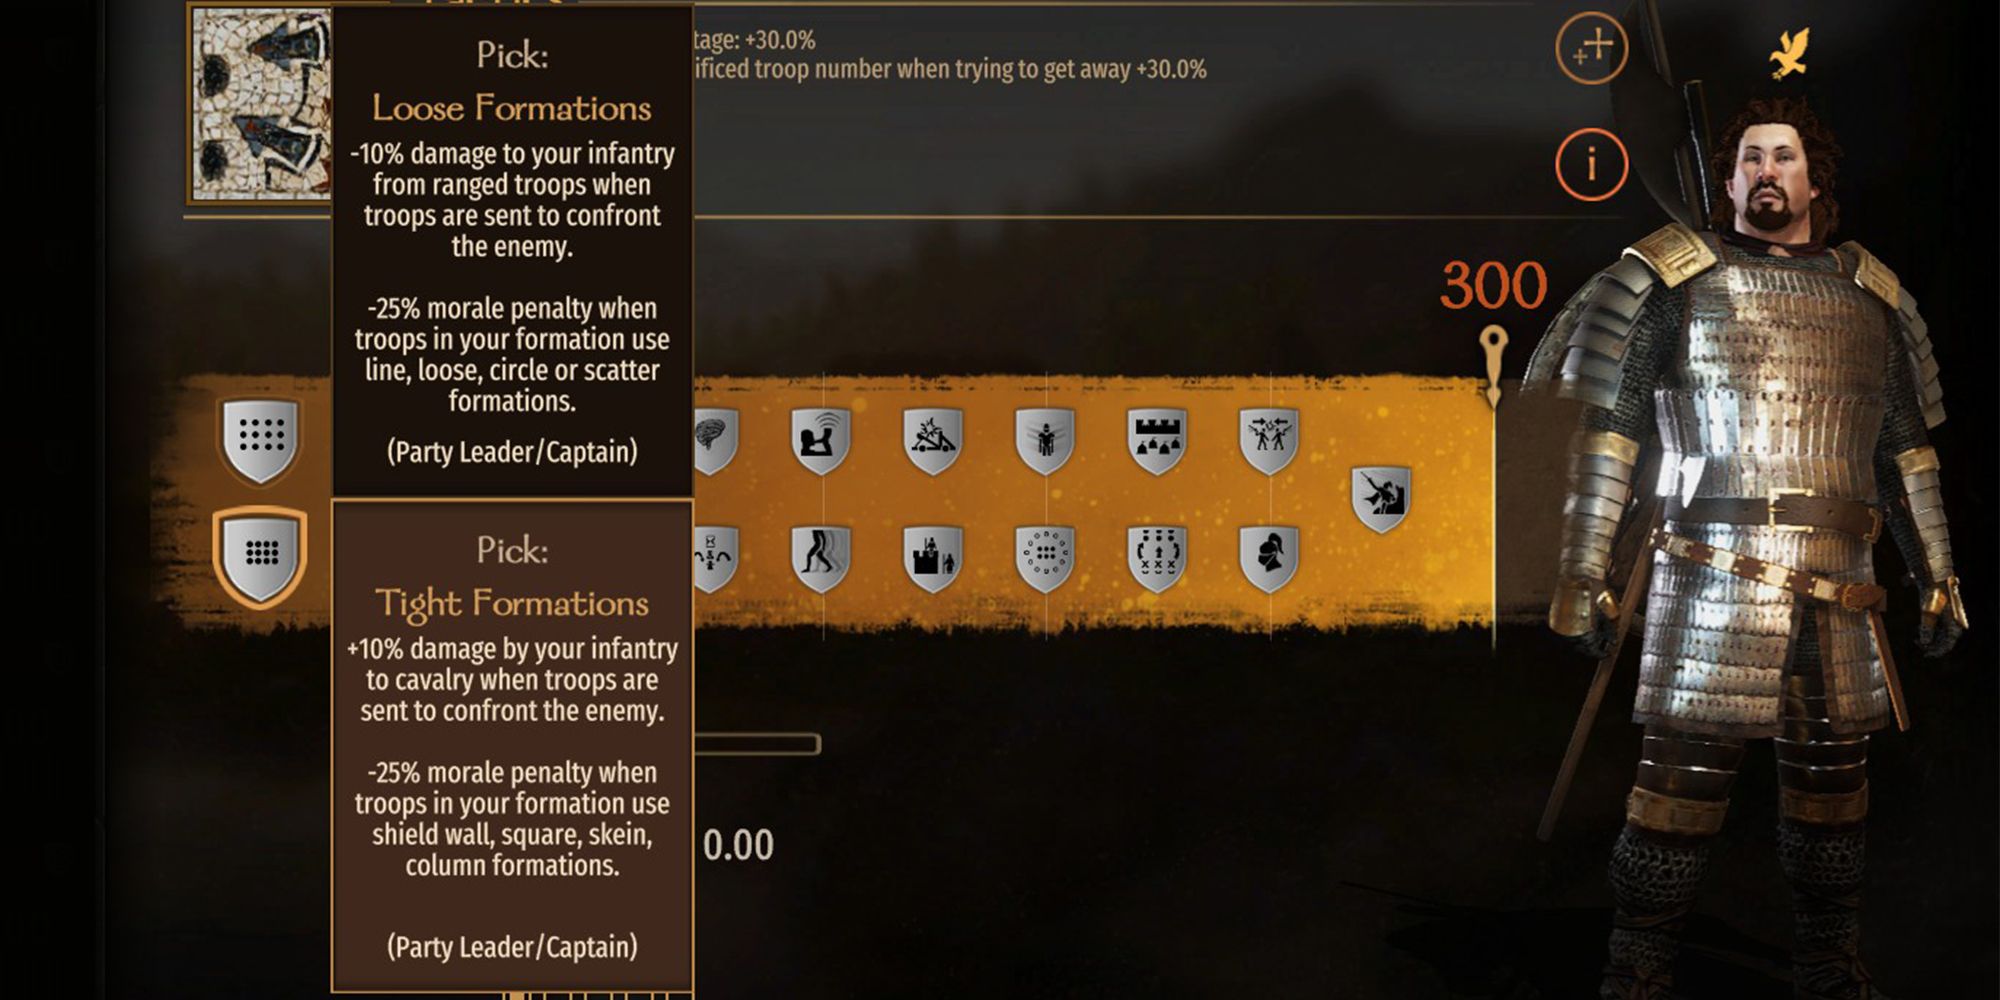 Tactics Tight Formation Perk Menu Description +10% damage to cavalry by infantry when troops are sent to face the enemy. -25% morale penalty when troops in formation use shield wall, square, skein, and column formations.